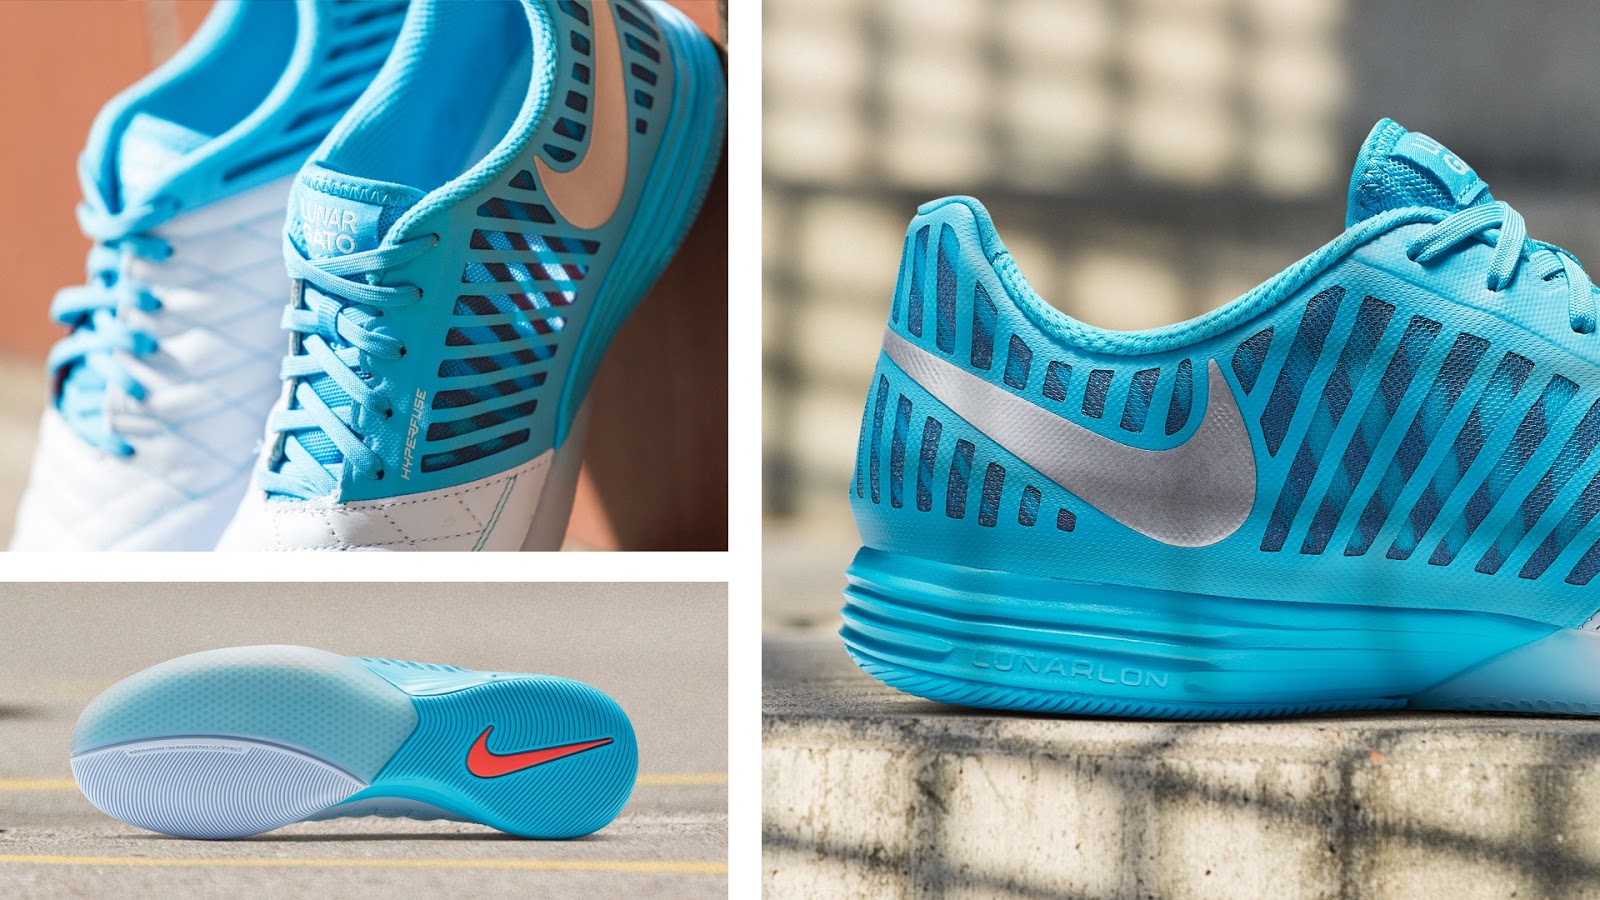 Four Years: Turquoise Nike Lunar Gato 2019 Boots Released - Footy